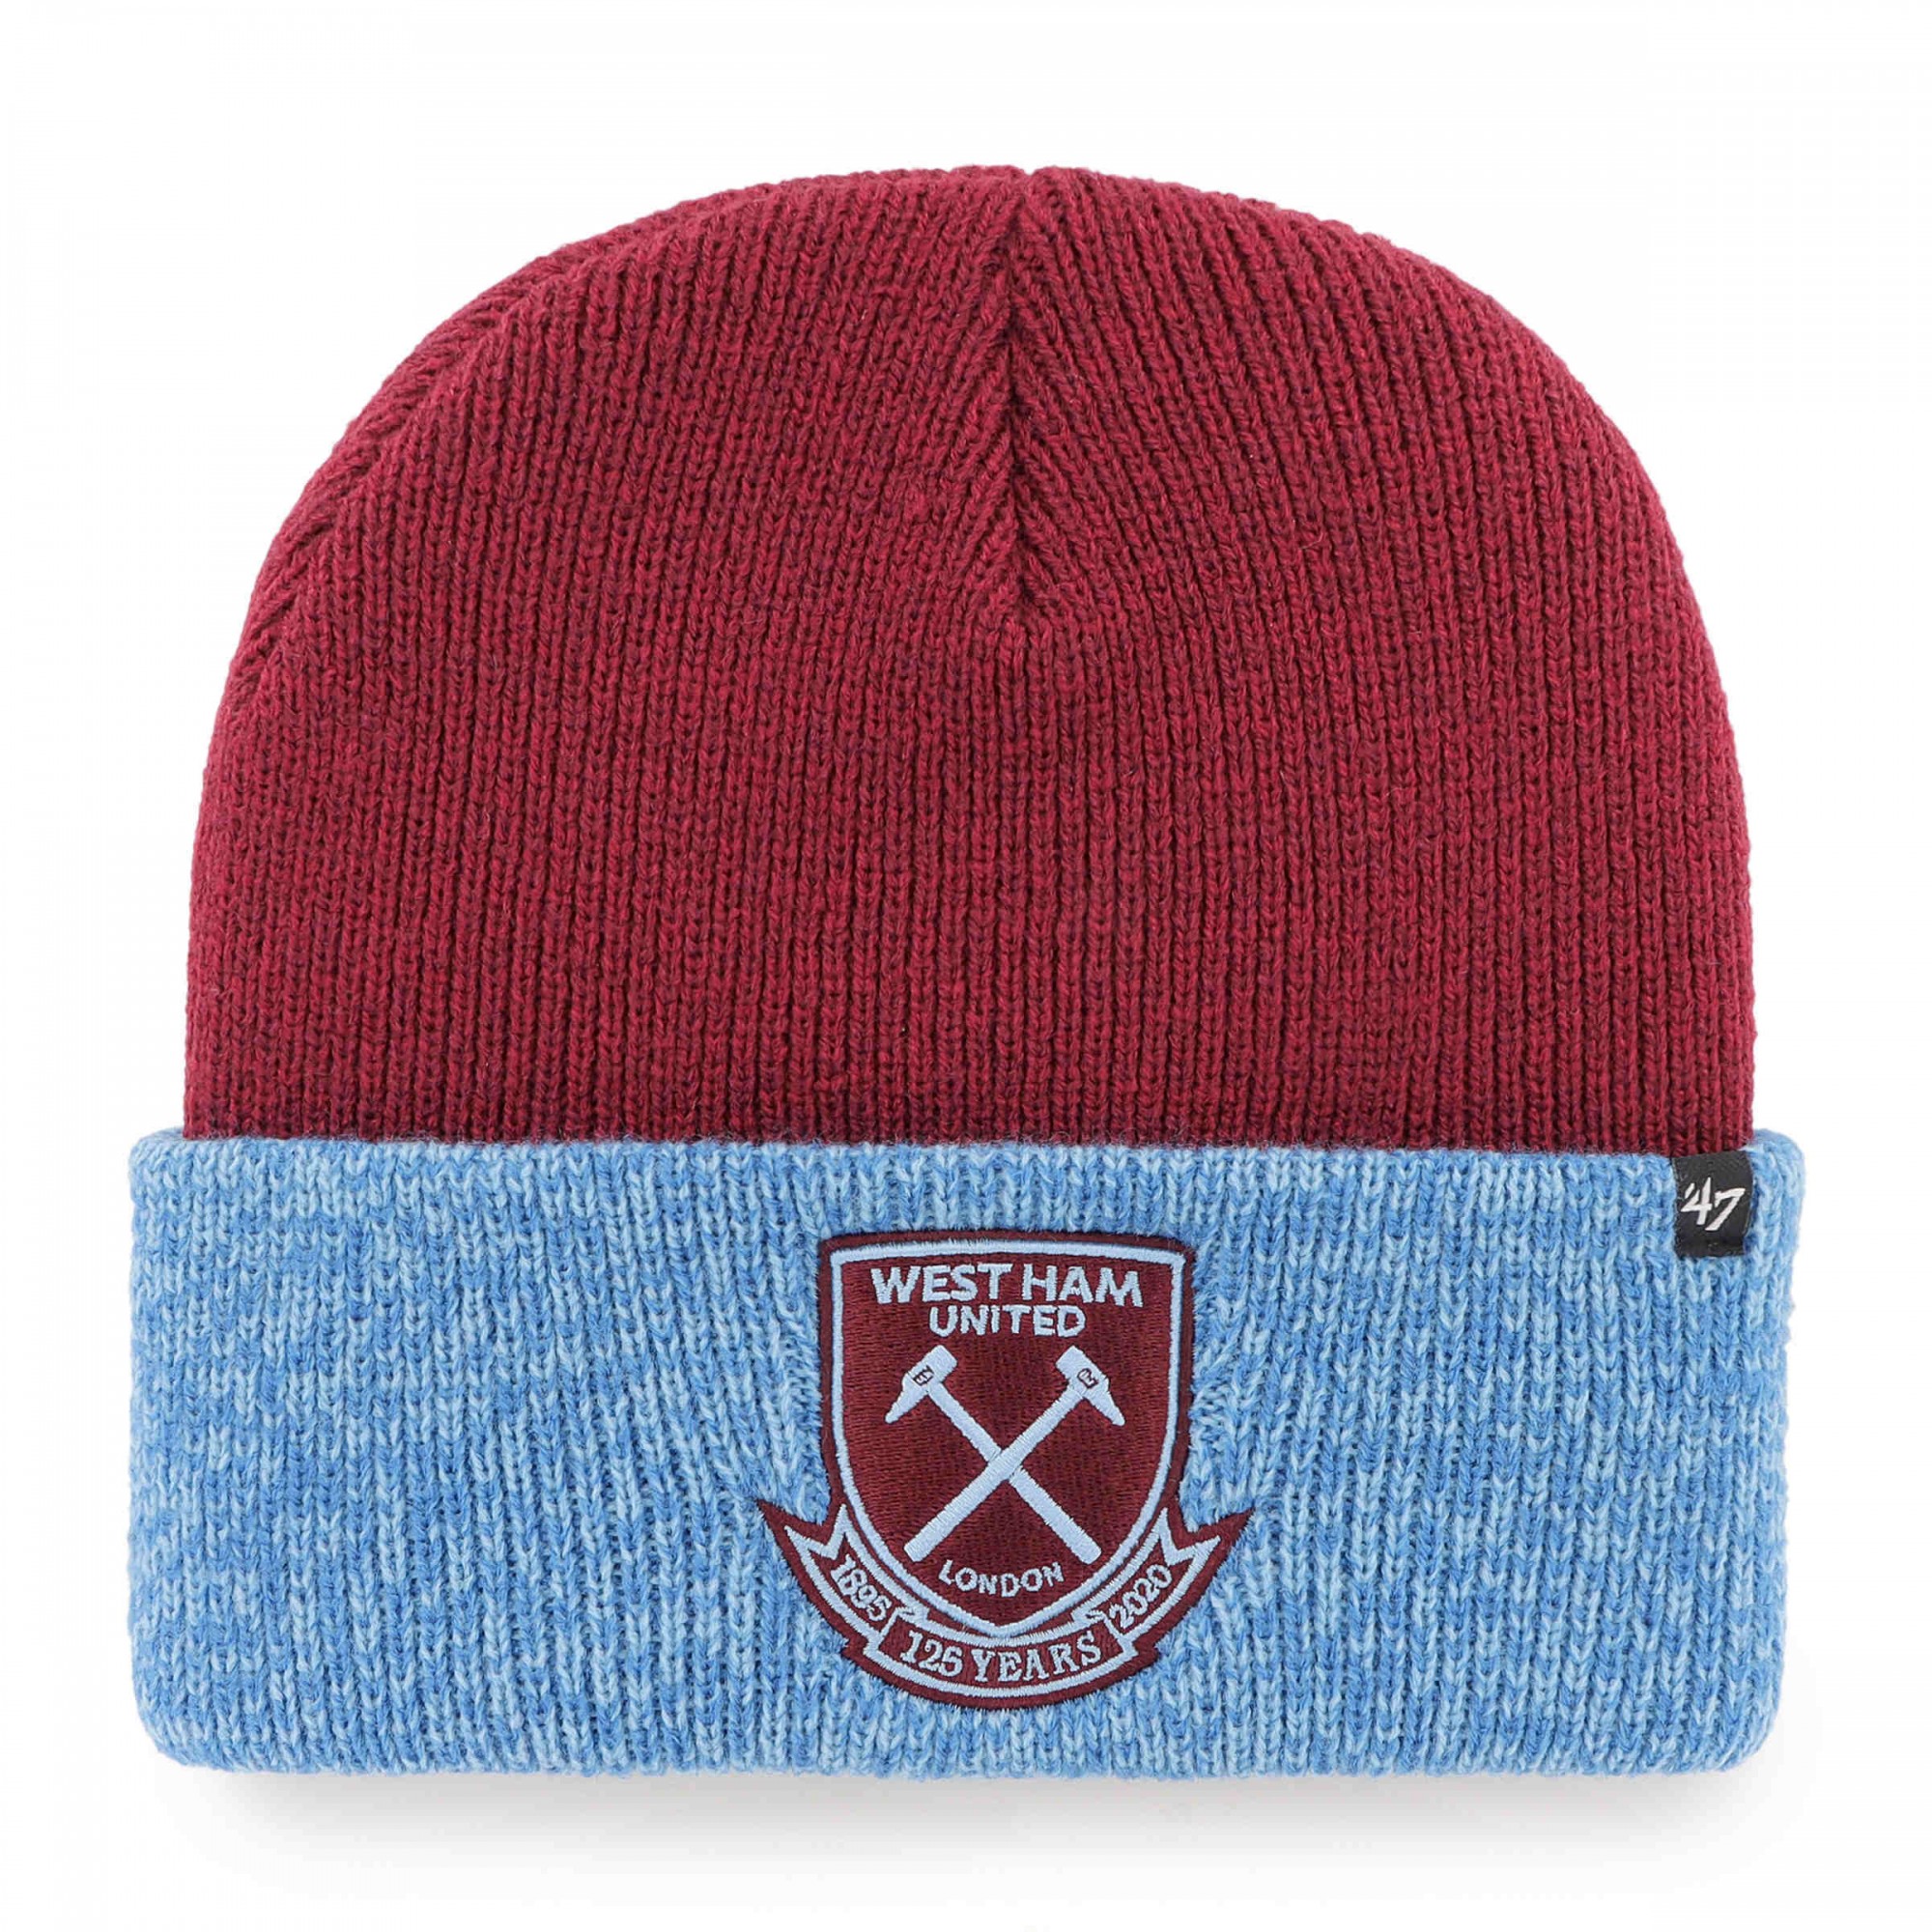 West Ham United Football Club Classic Crest Youth Knitted Beanie Hat Claret Navy 